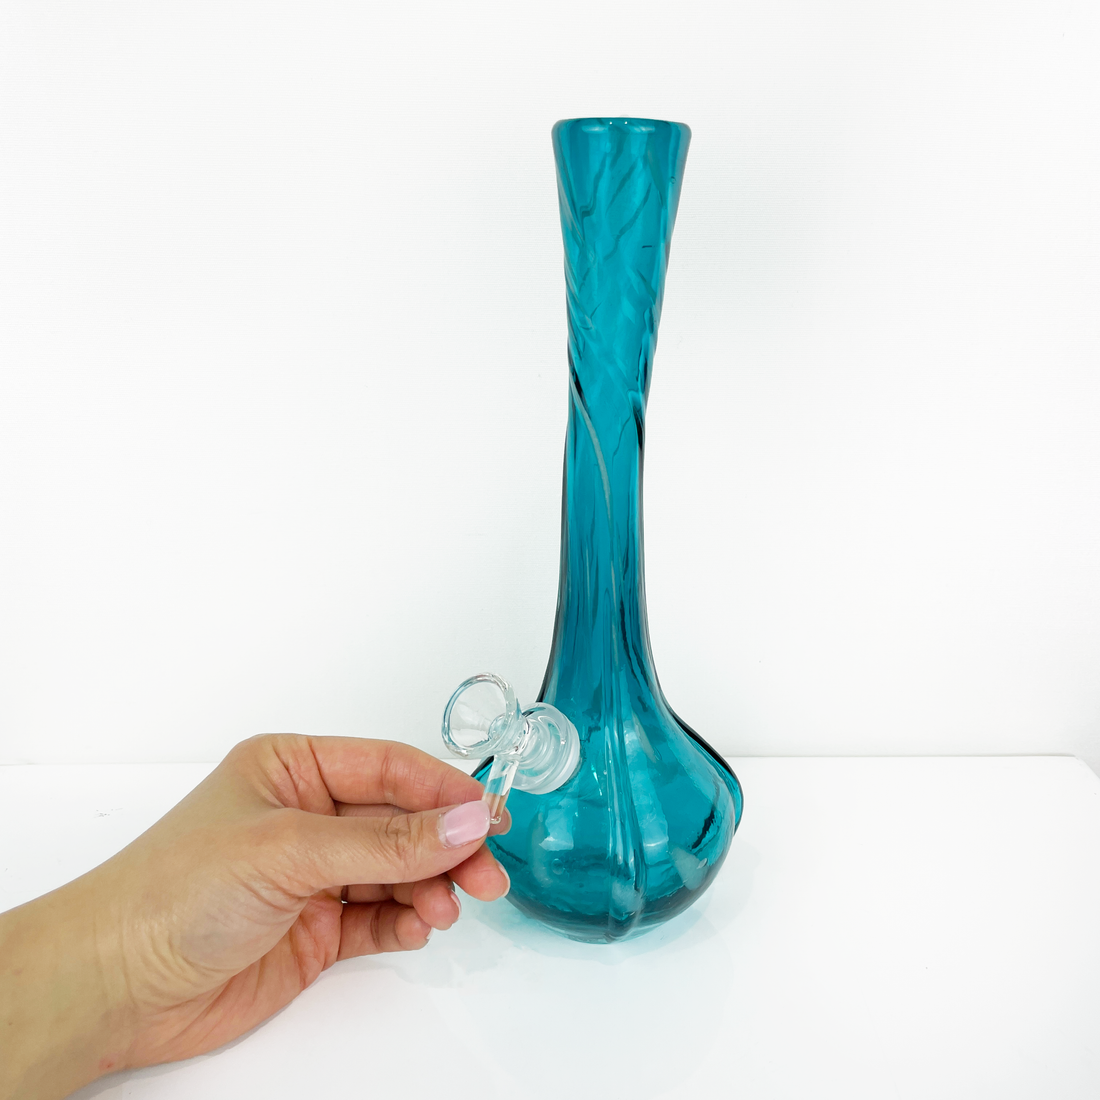 Vintage style teal bong bliss shop chicago